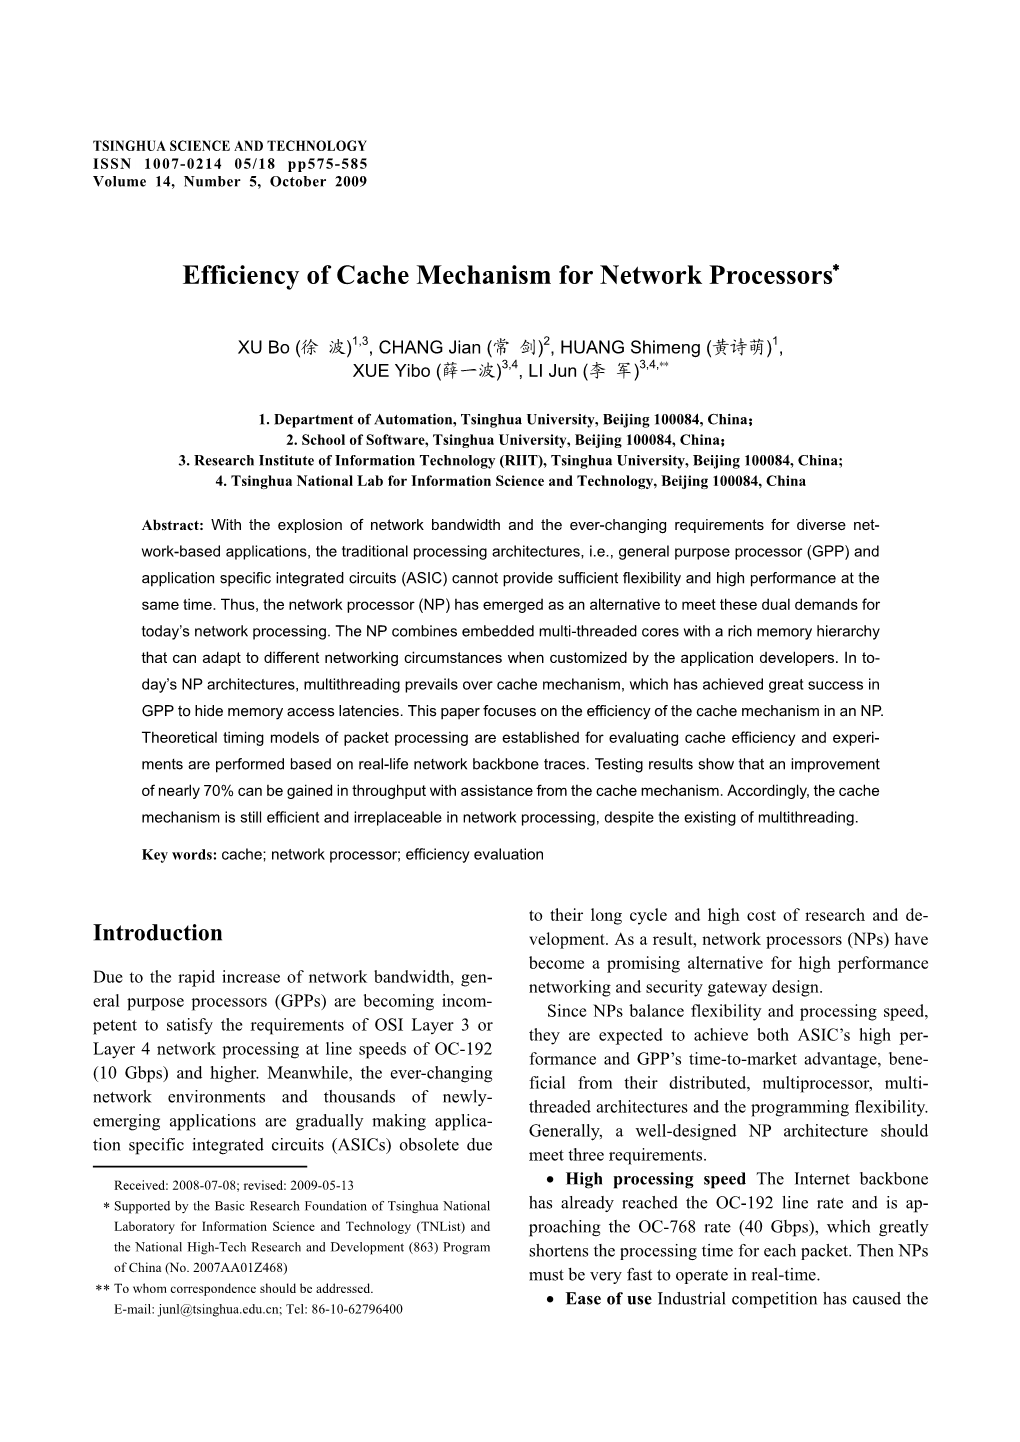 Efficiency of Cache Mechanism for Network Processors